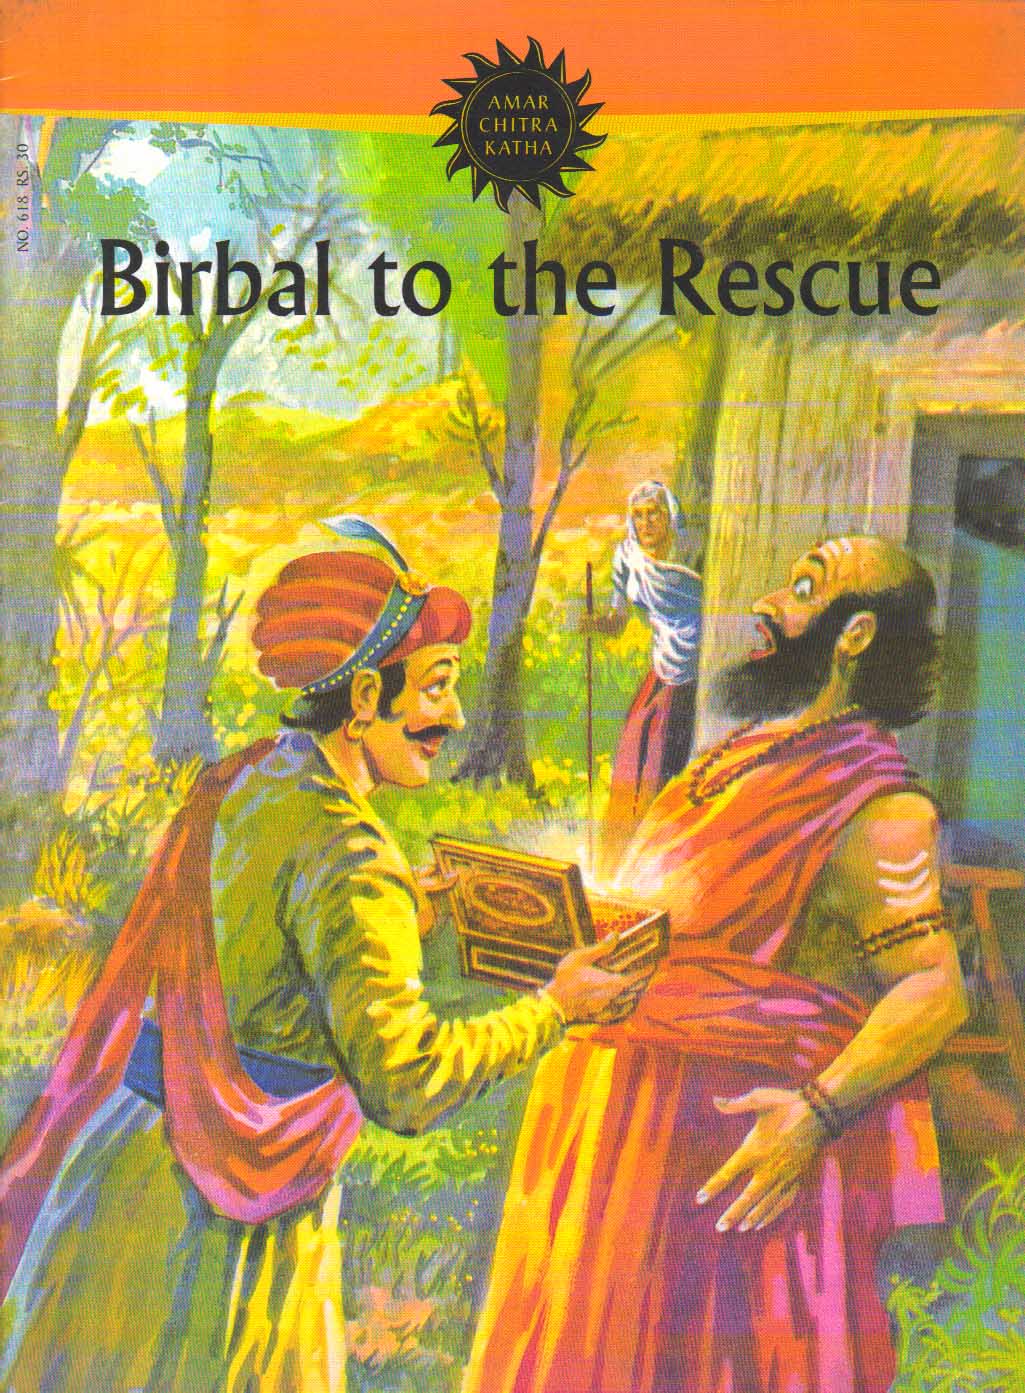 Birbal to the Rescue.